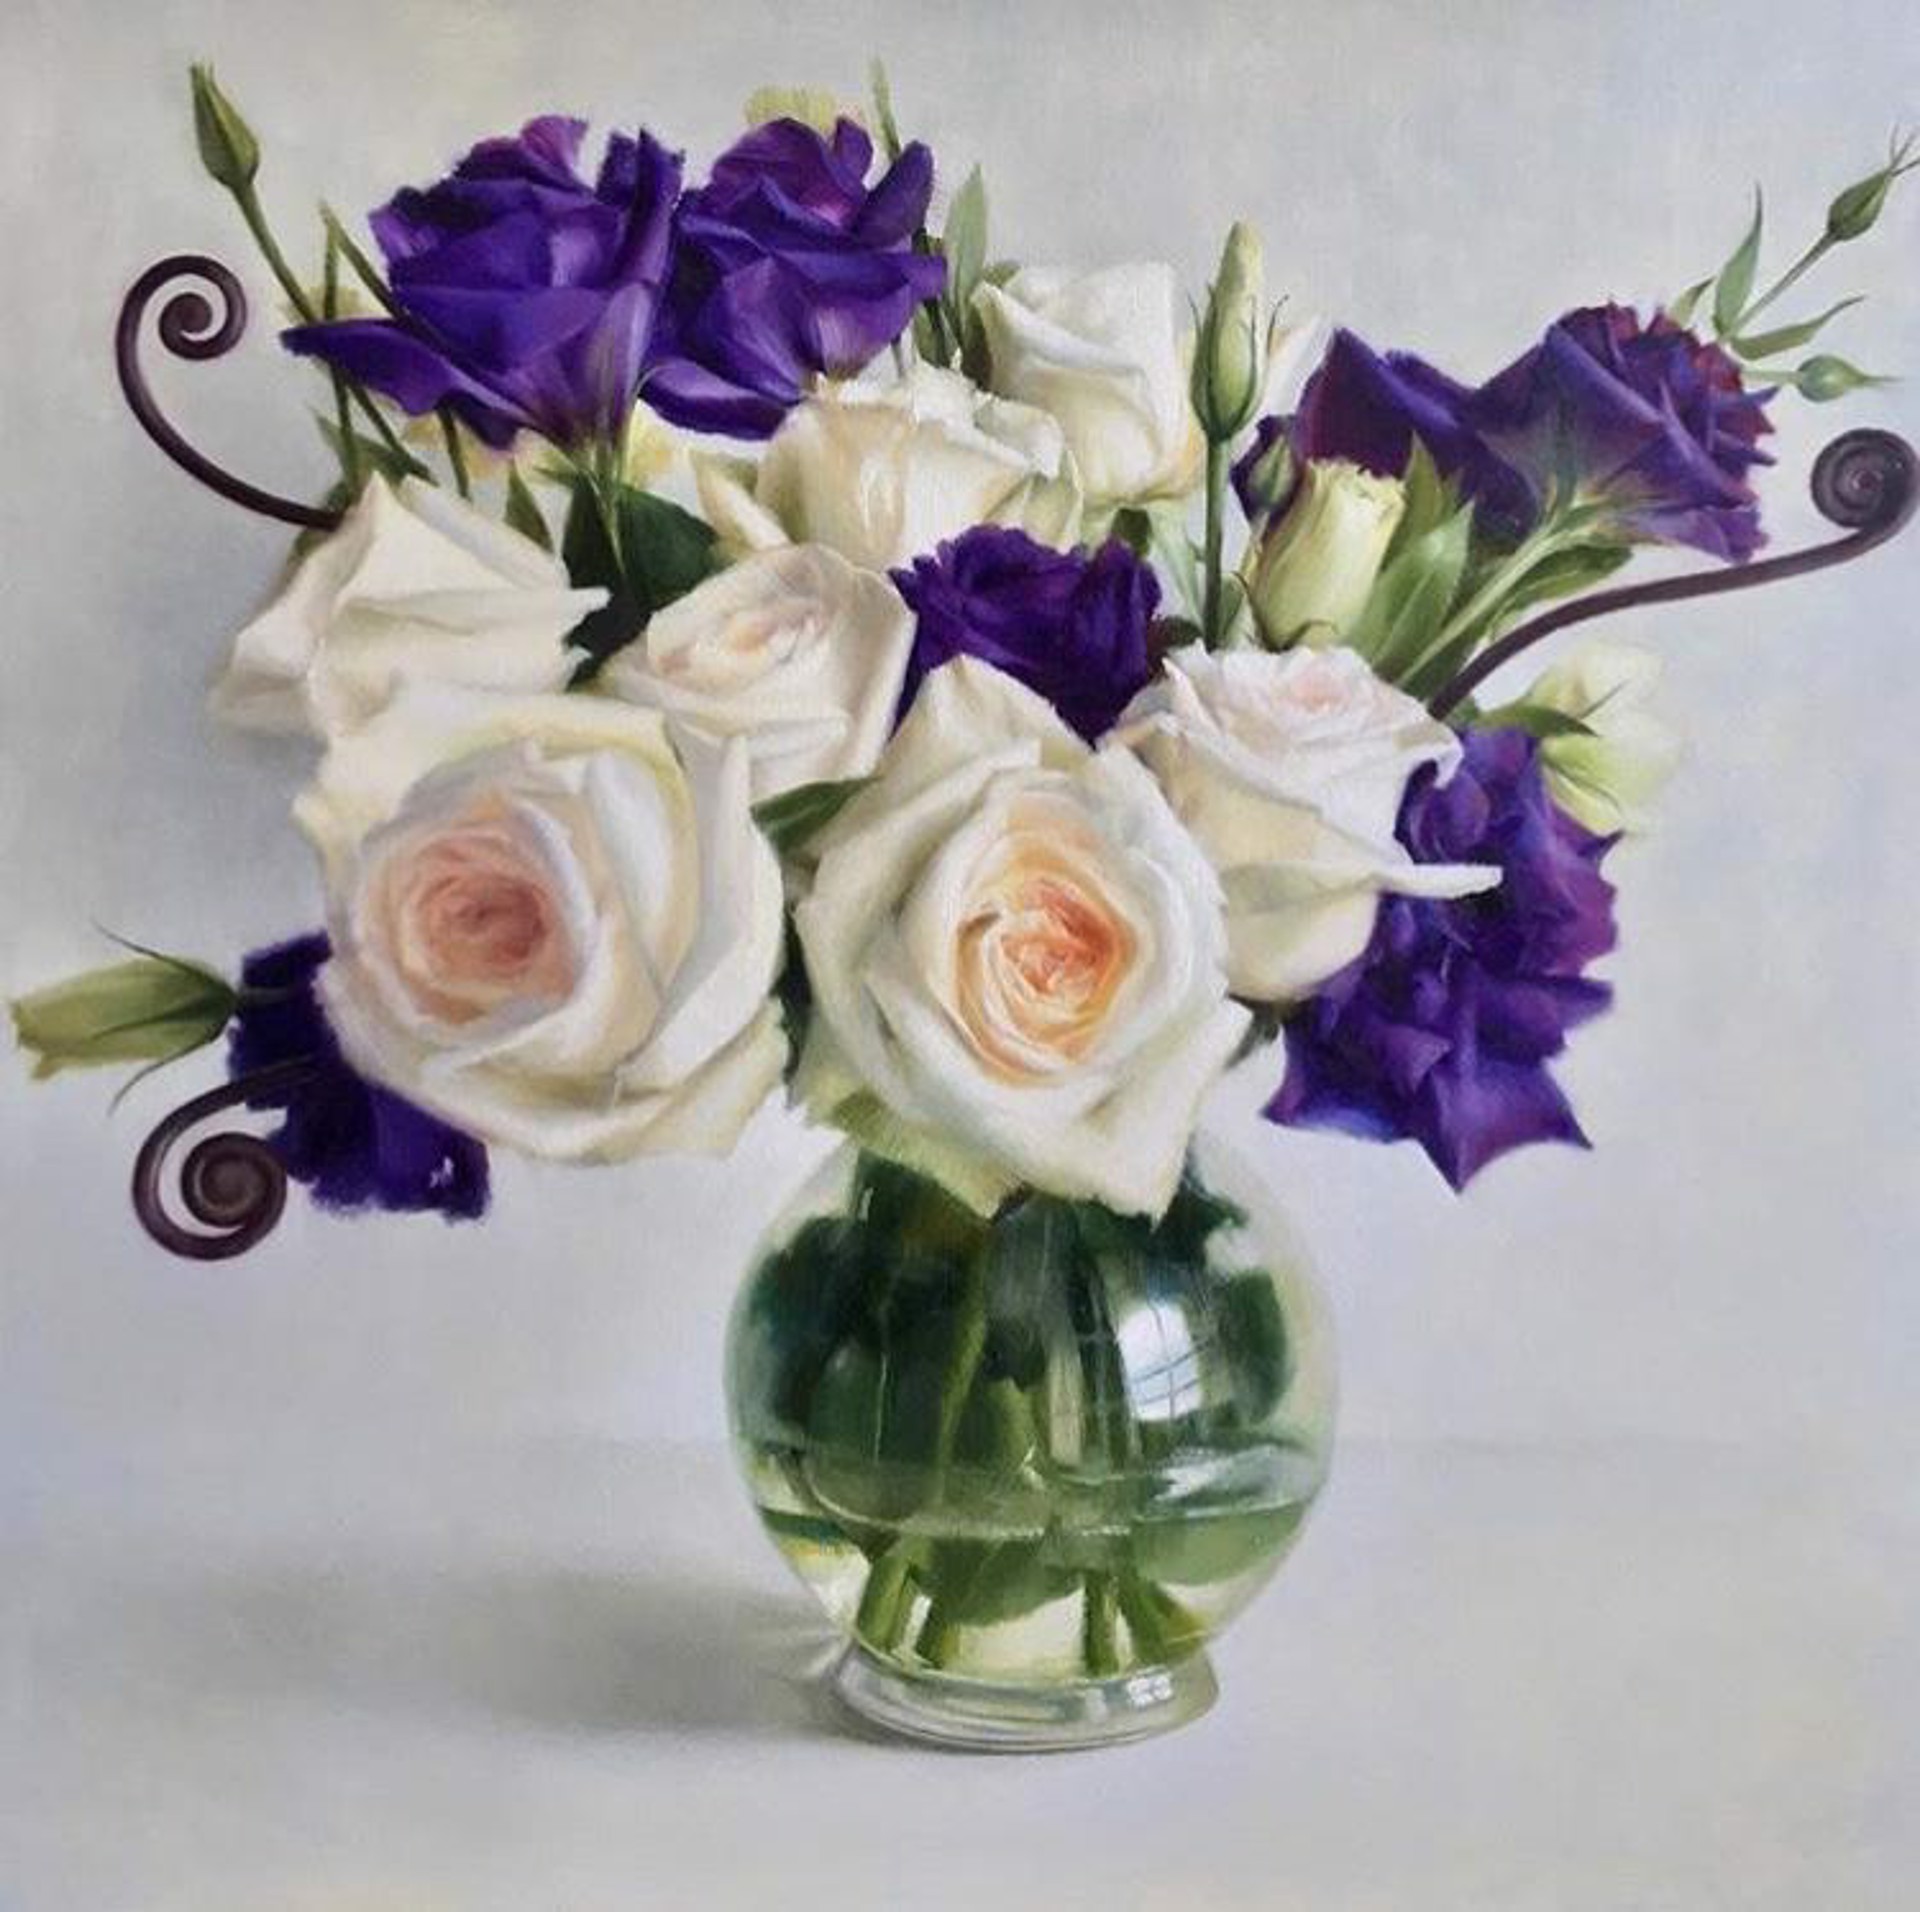 Roses, Lisianthus, and Fern Shoots by Dhwani Parekh